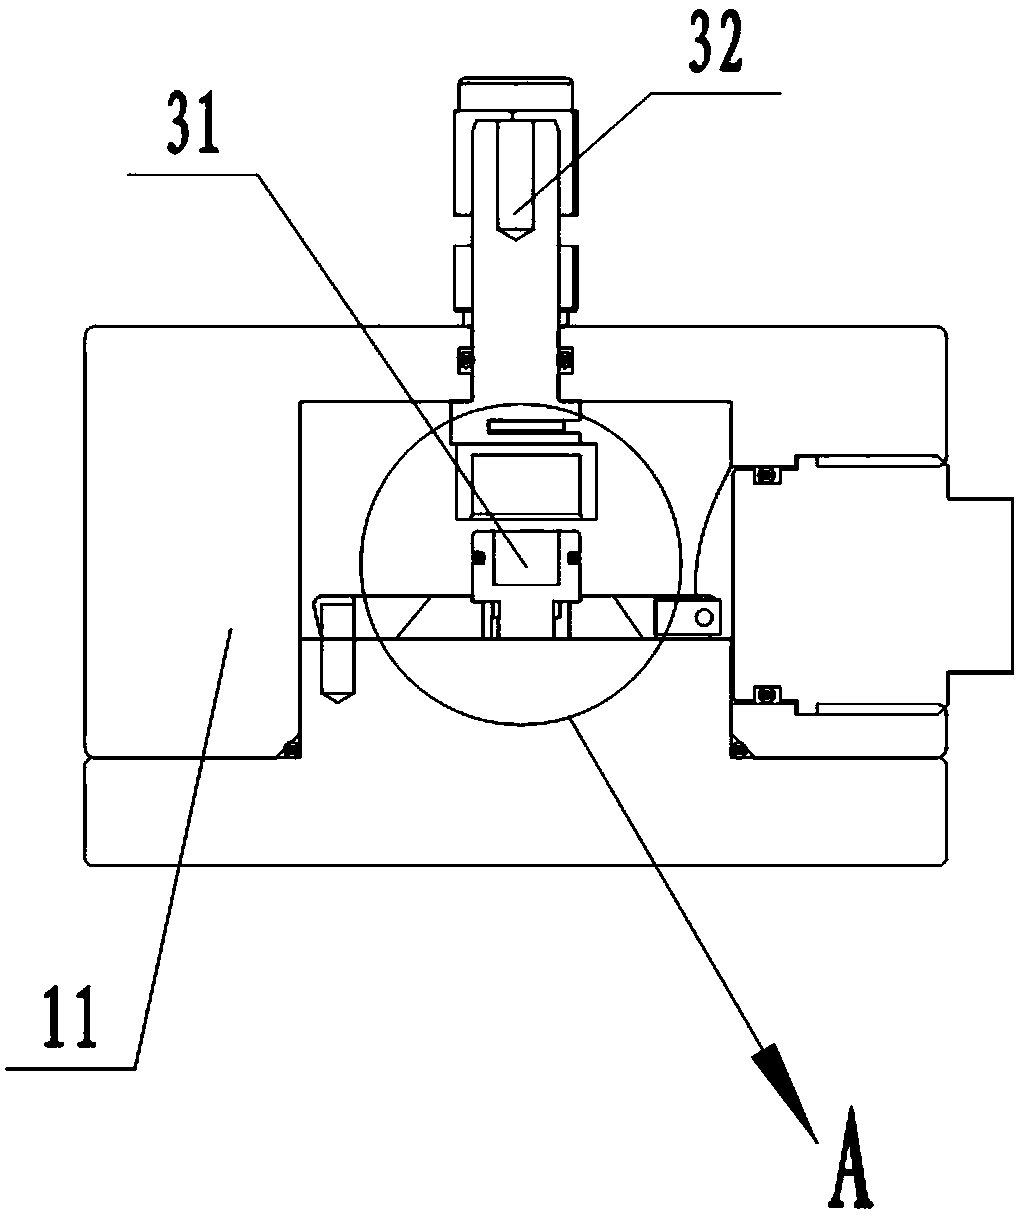 Sample preparation and transfer device and method for combined test of hydrate CT and SEM